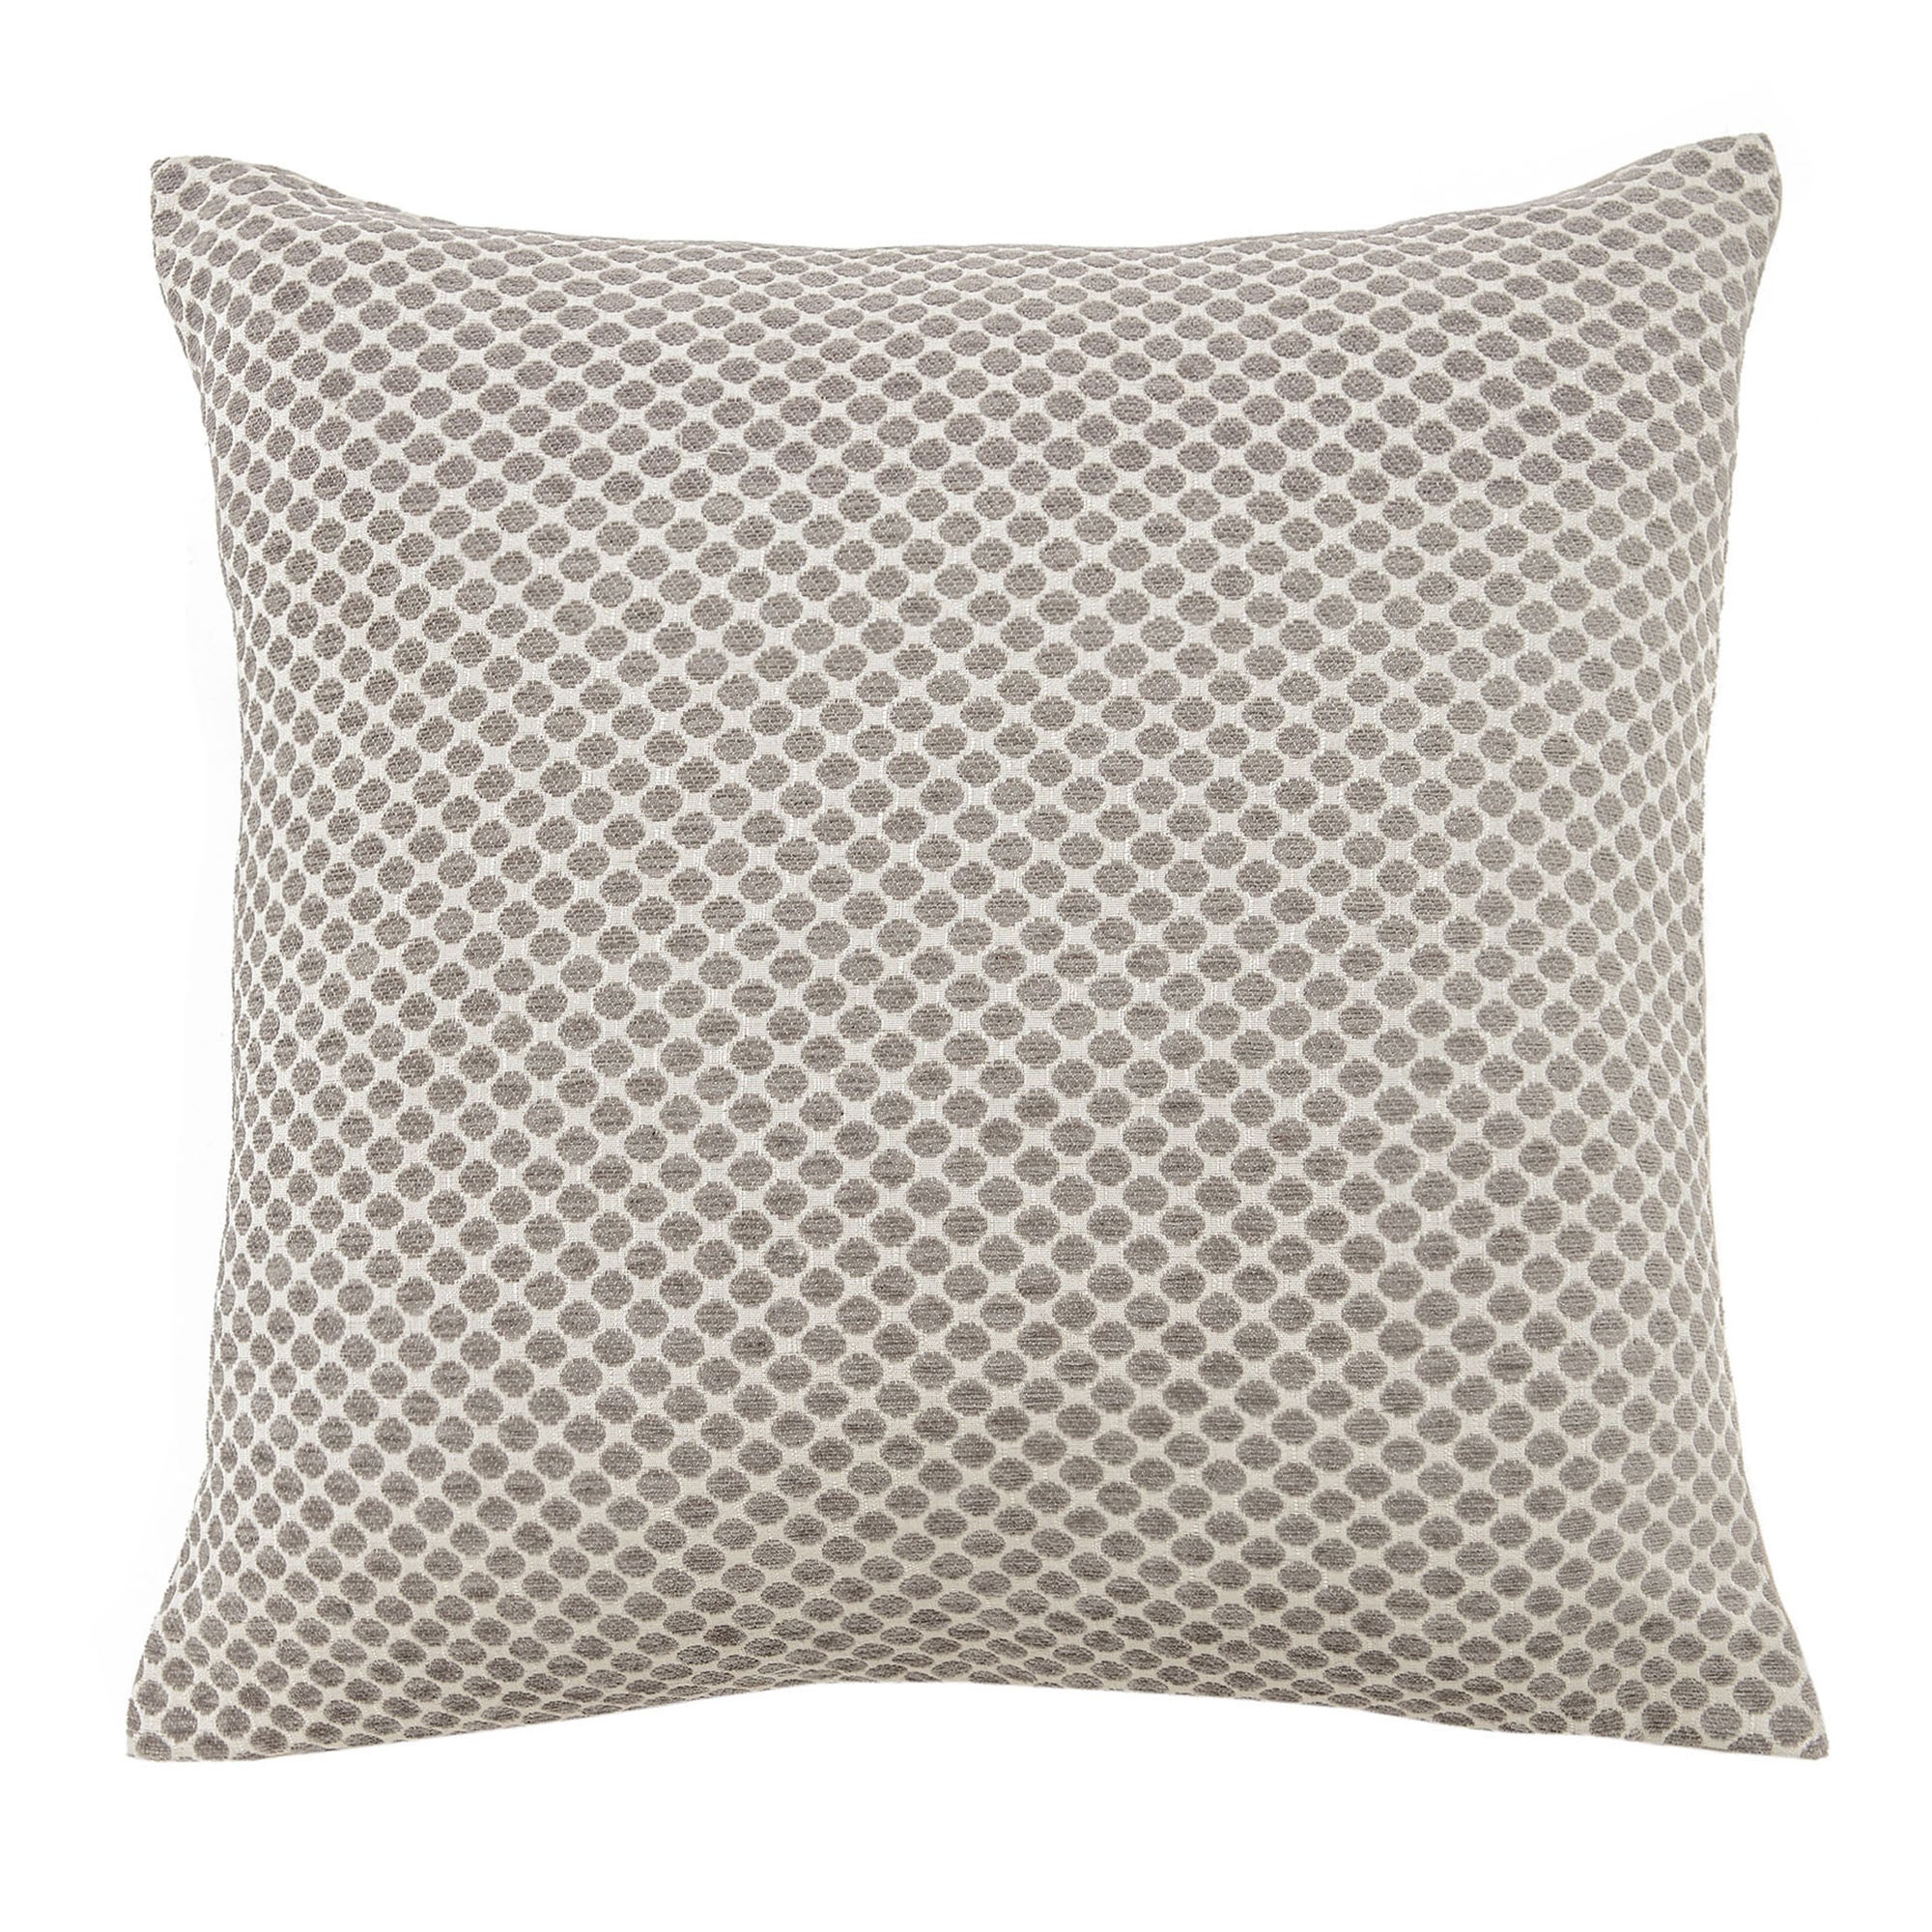 Filled Cushions | Small & Large Filled Cushions | Dunelm - Page 4